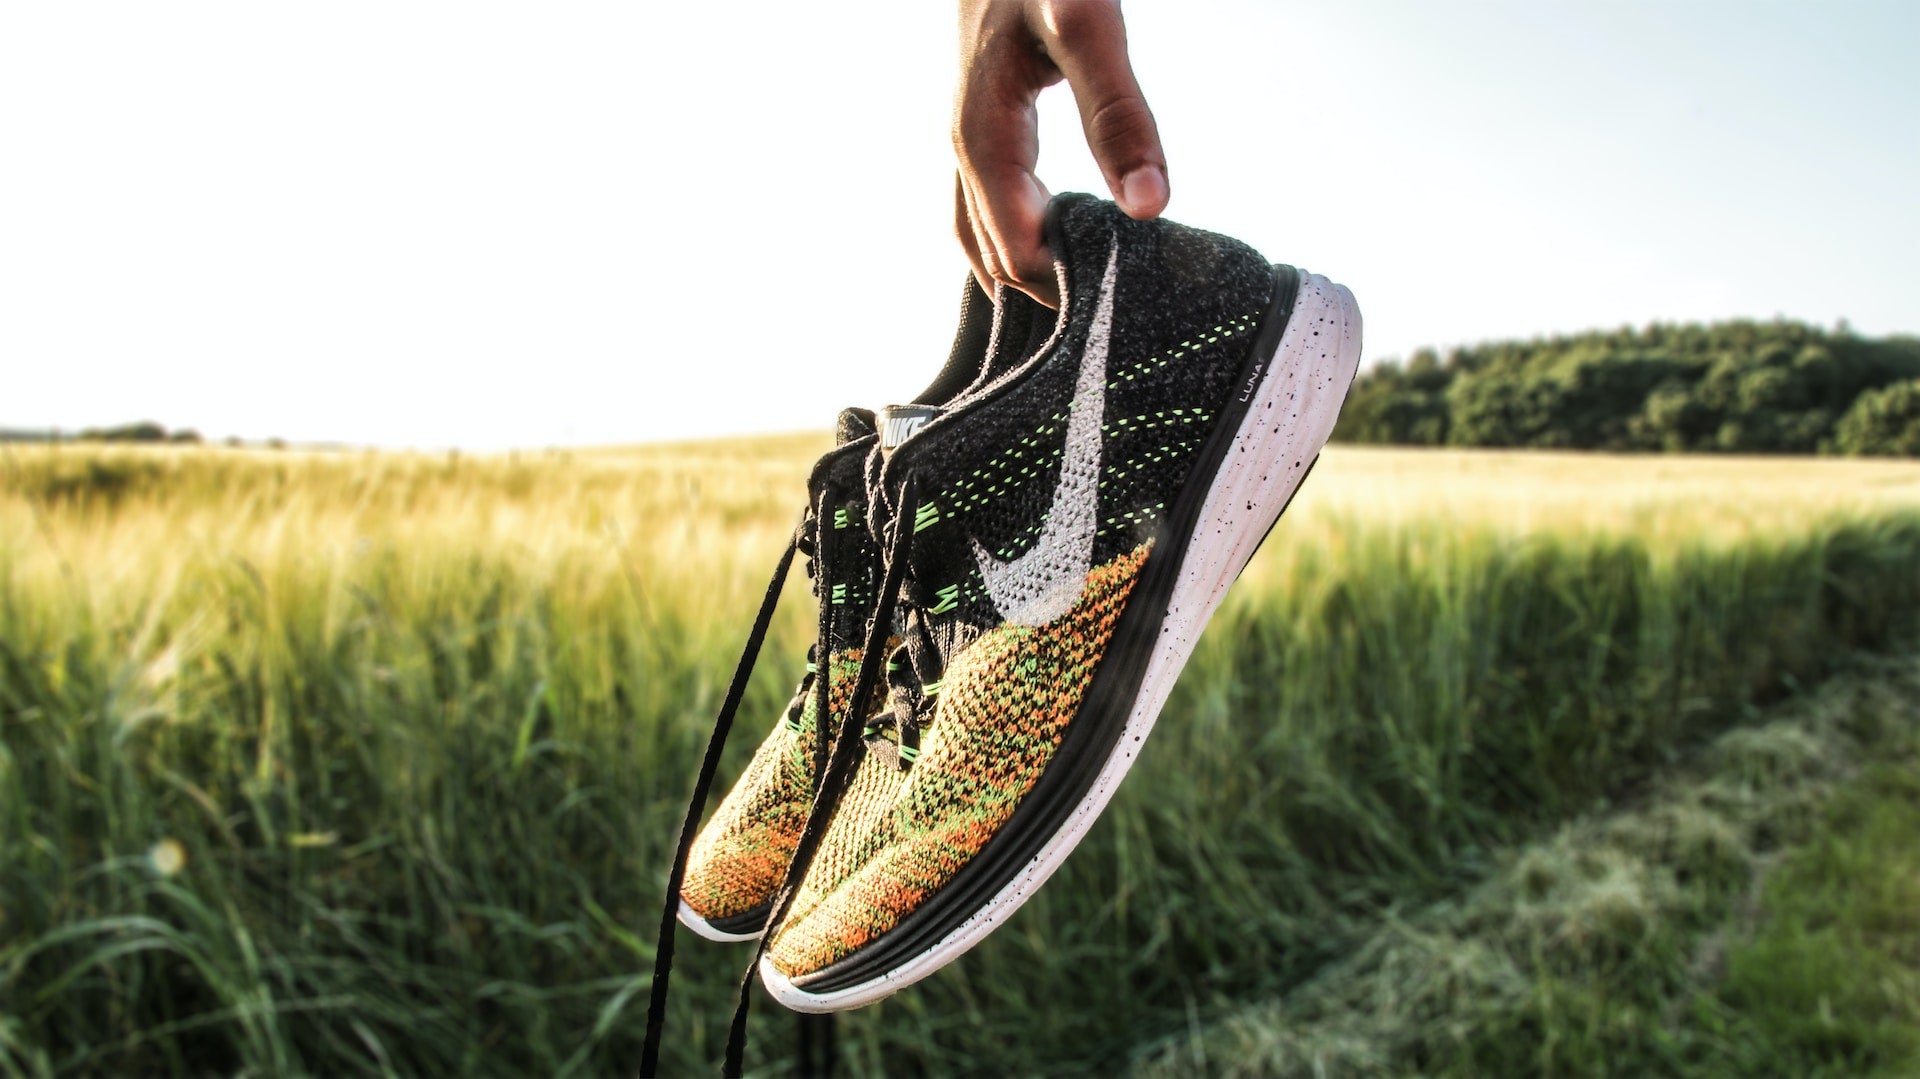 Running Shoe Care: How To Look After Running Shoes